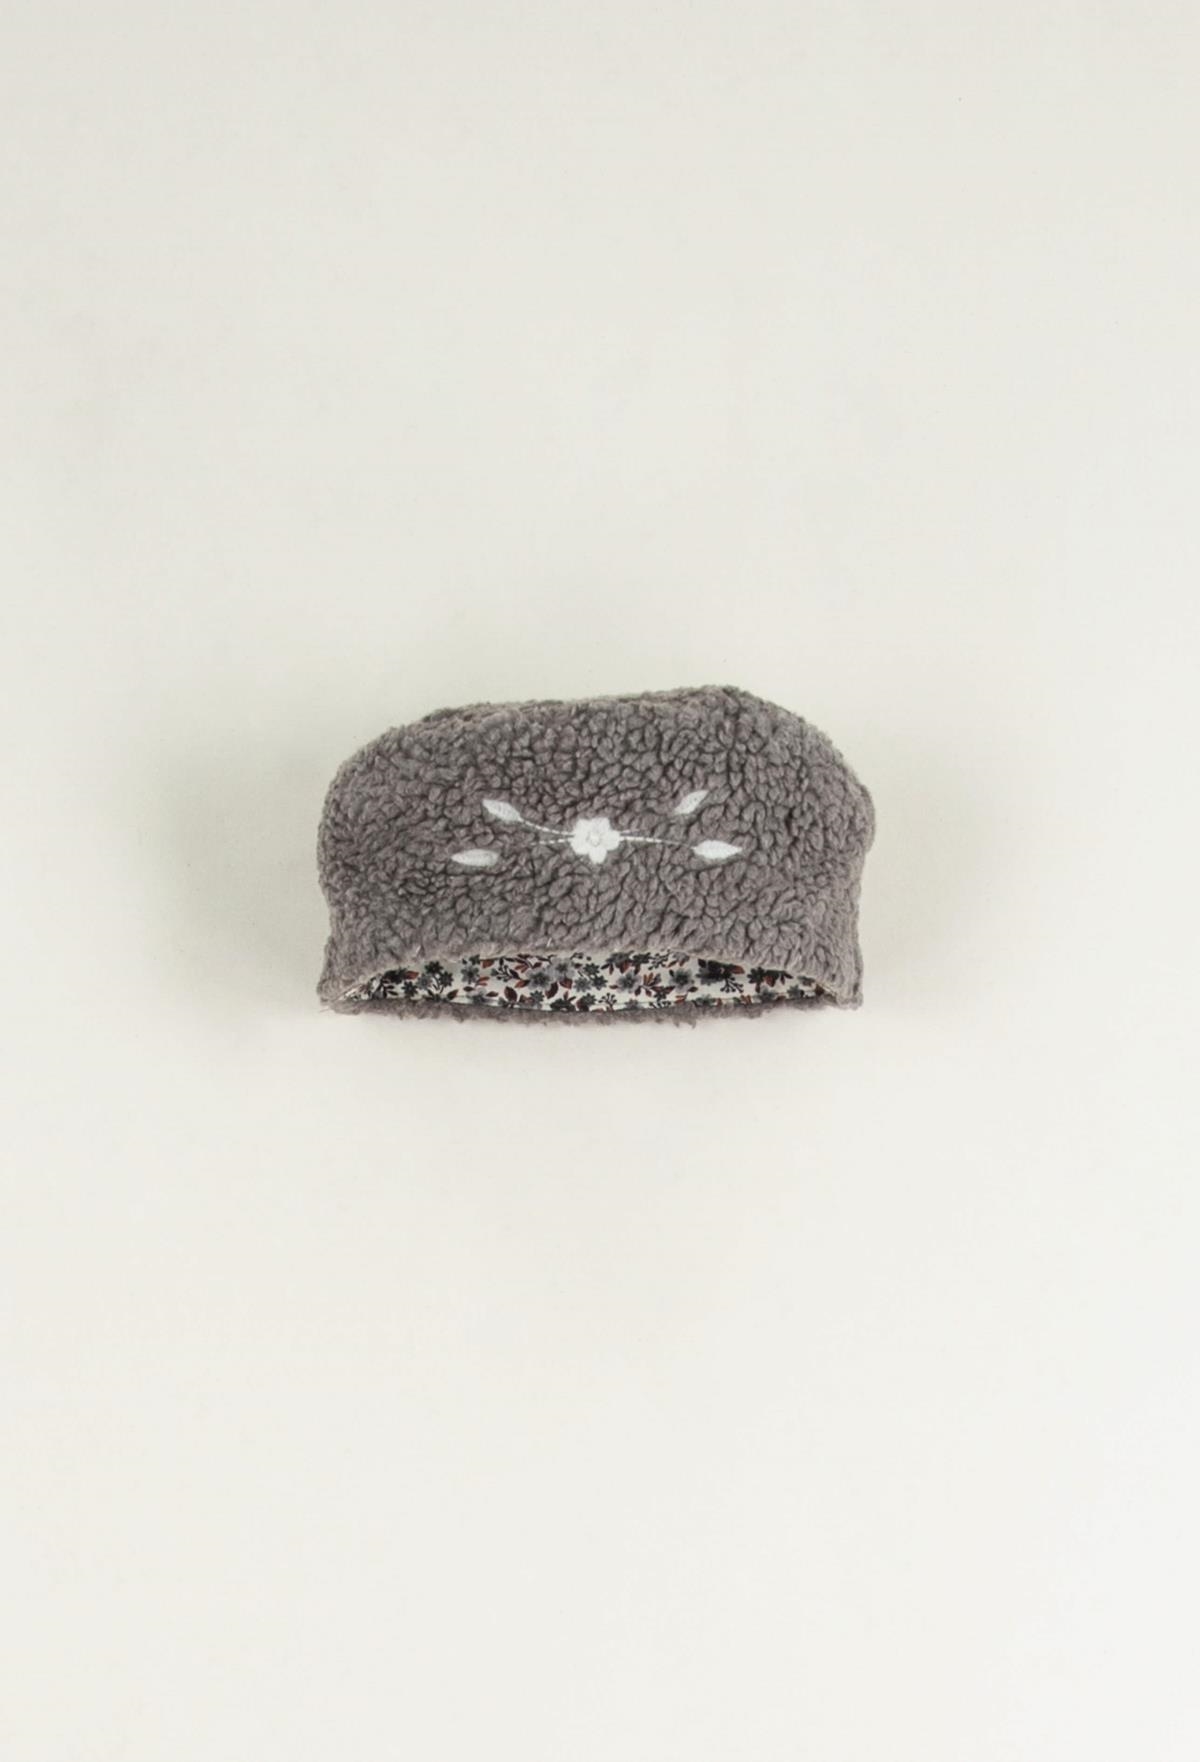 Mod.44.2 Taupe embroidered Russian hat | AW22.23 Mod.44.2 Taupe embroidered Russian hat